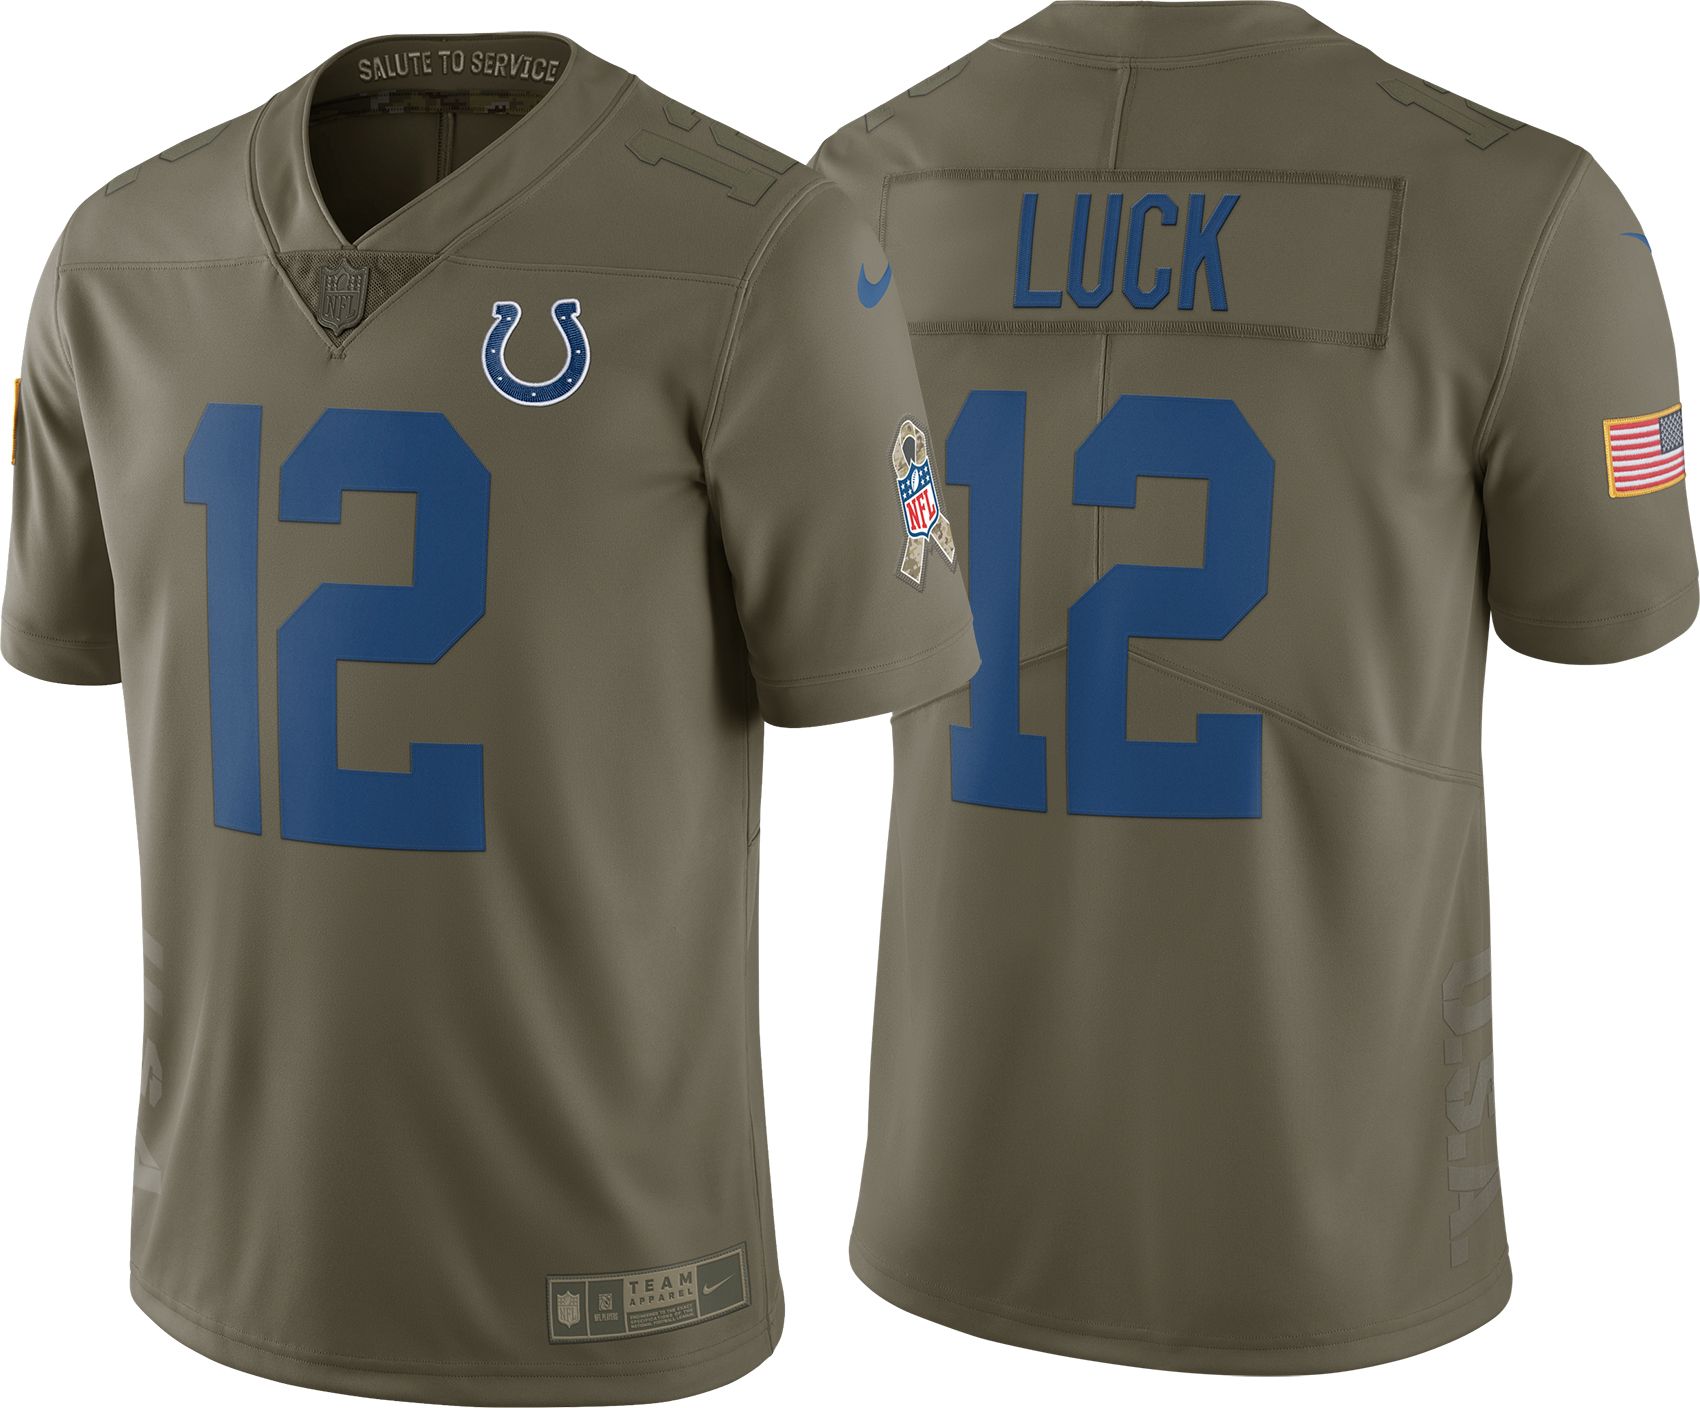 colts military jersey